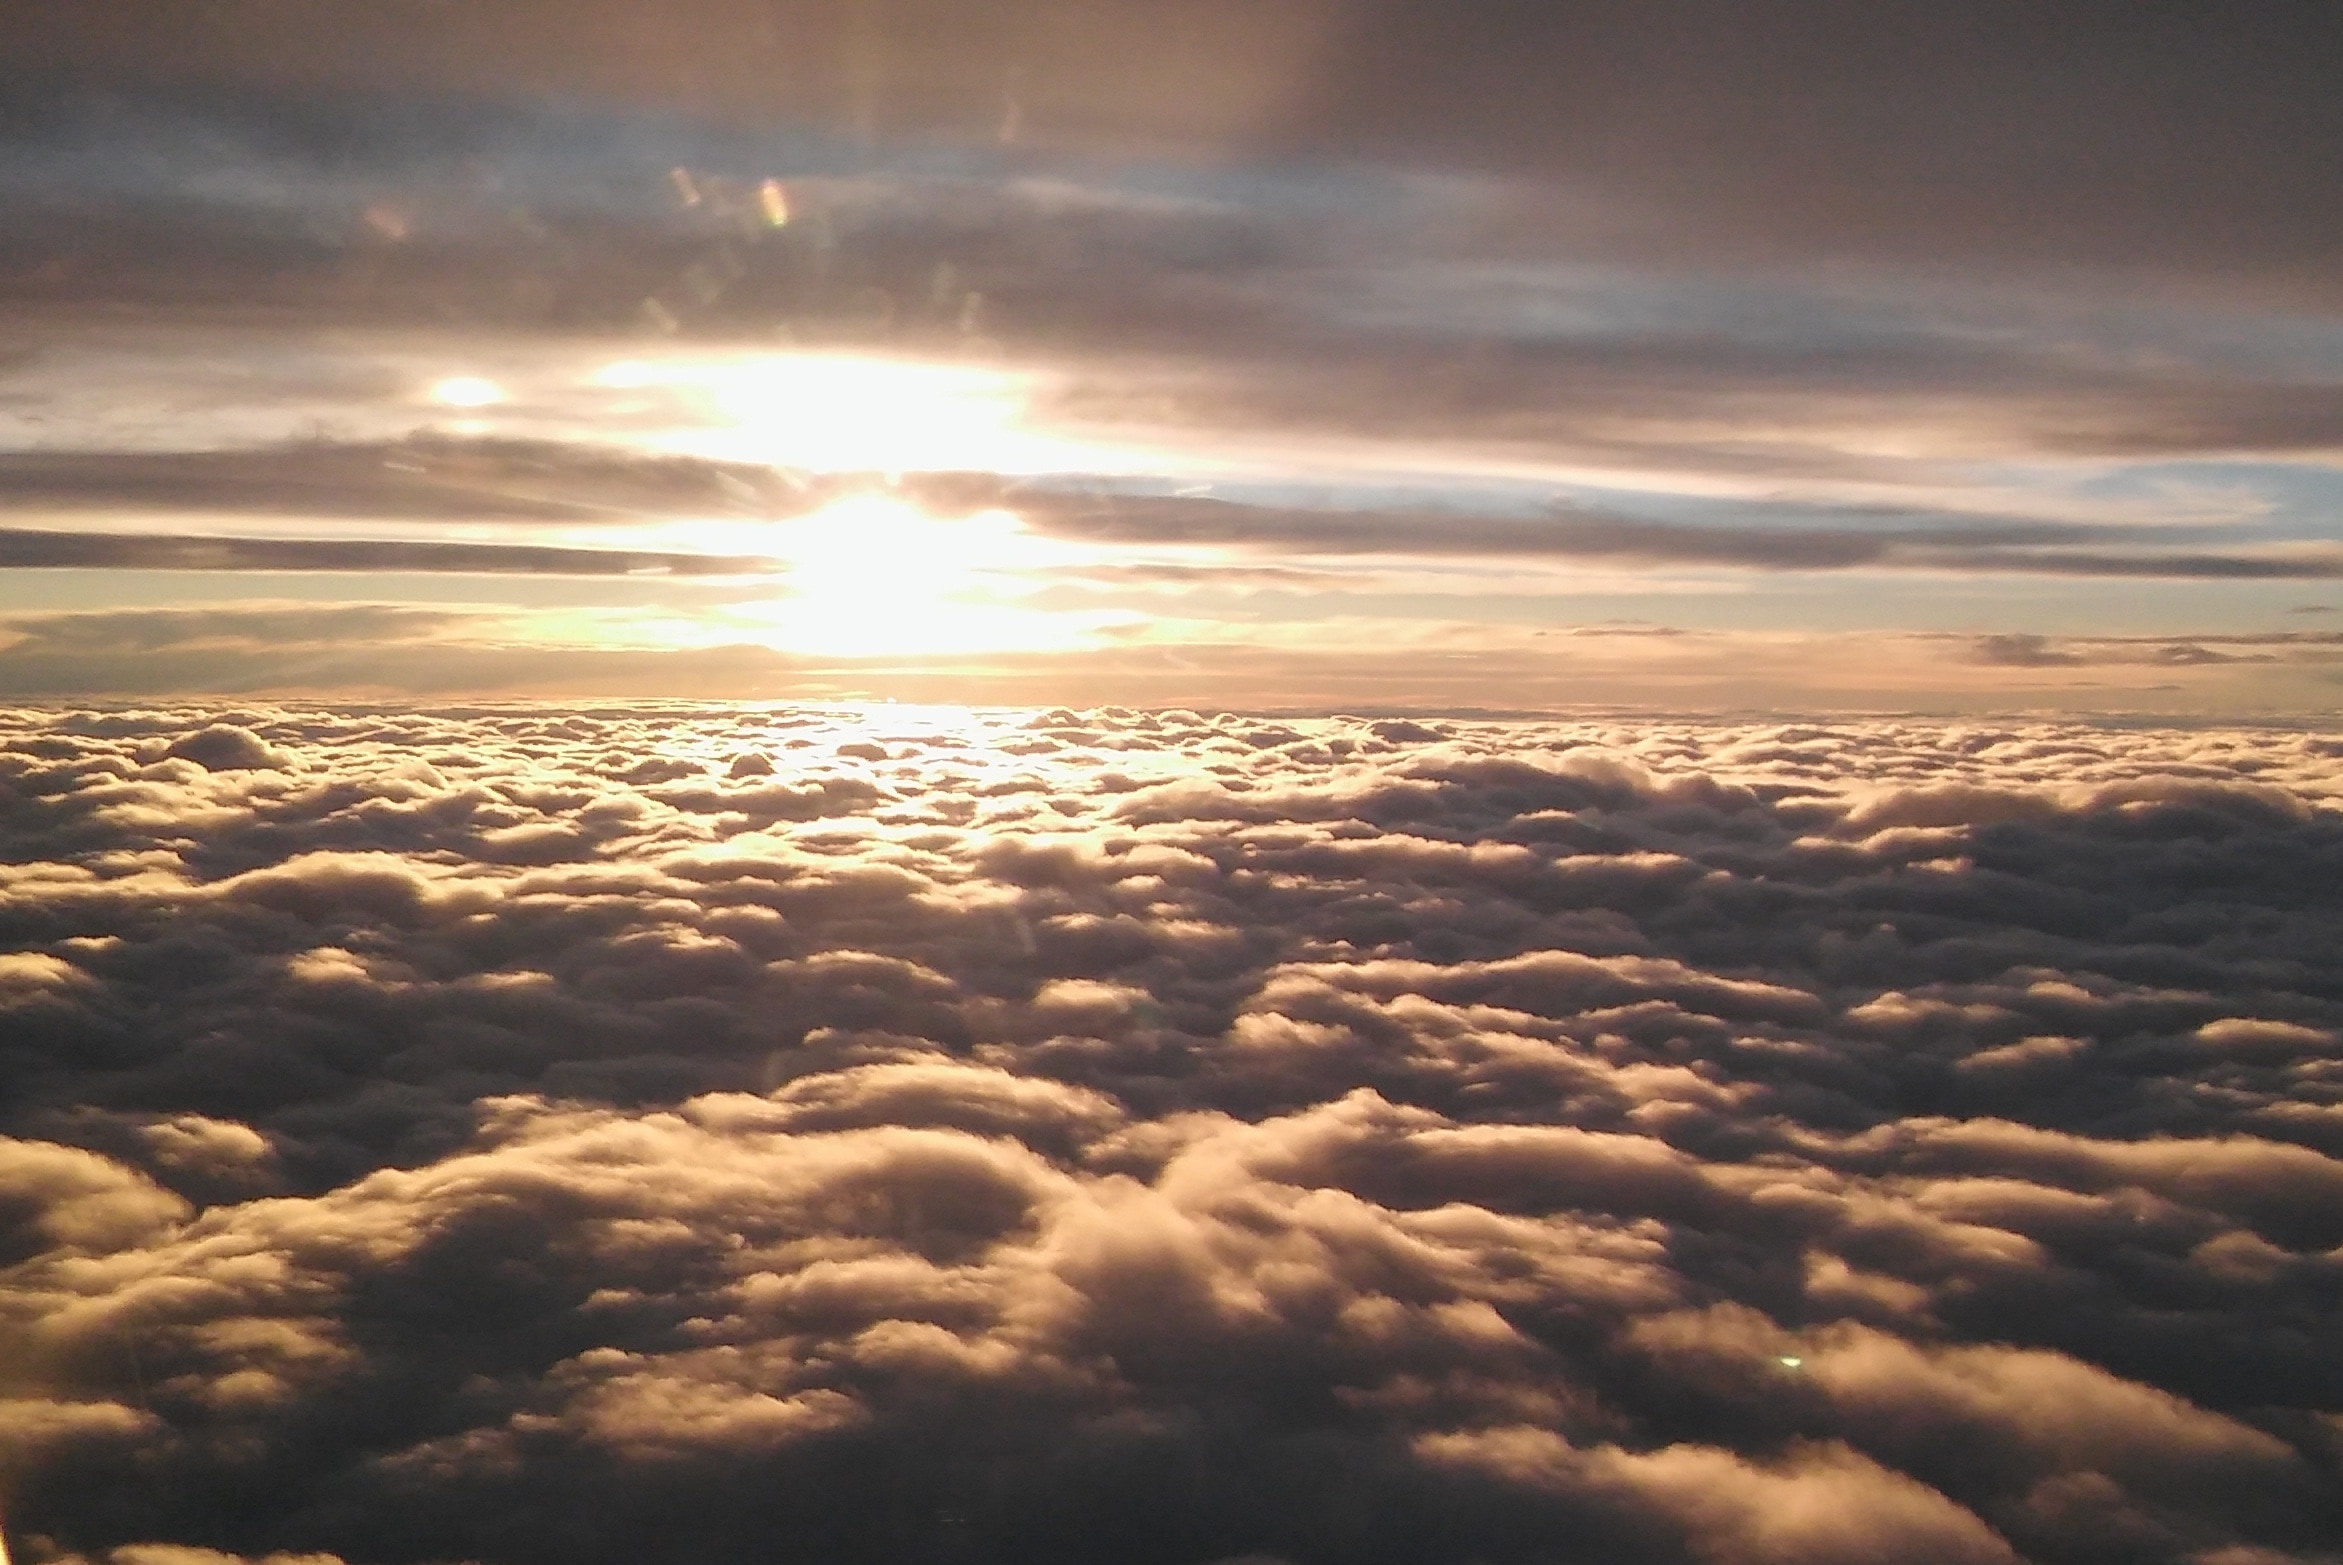 bird's eye view of clouds over seeing sun set